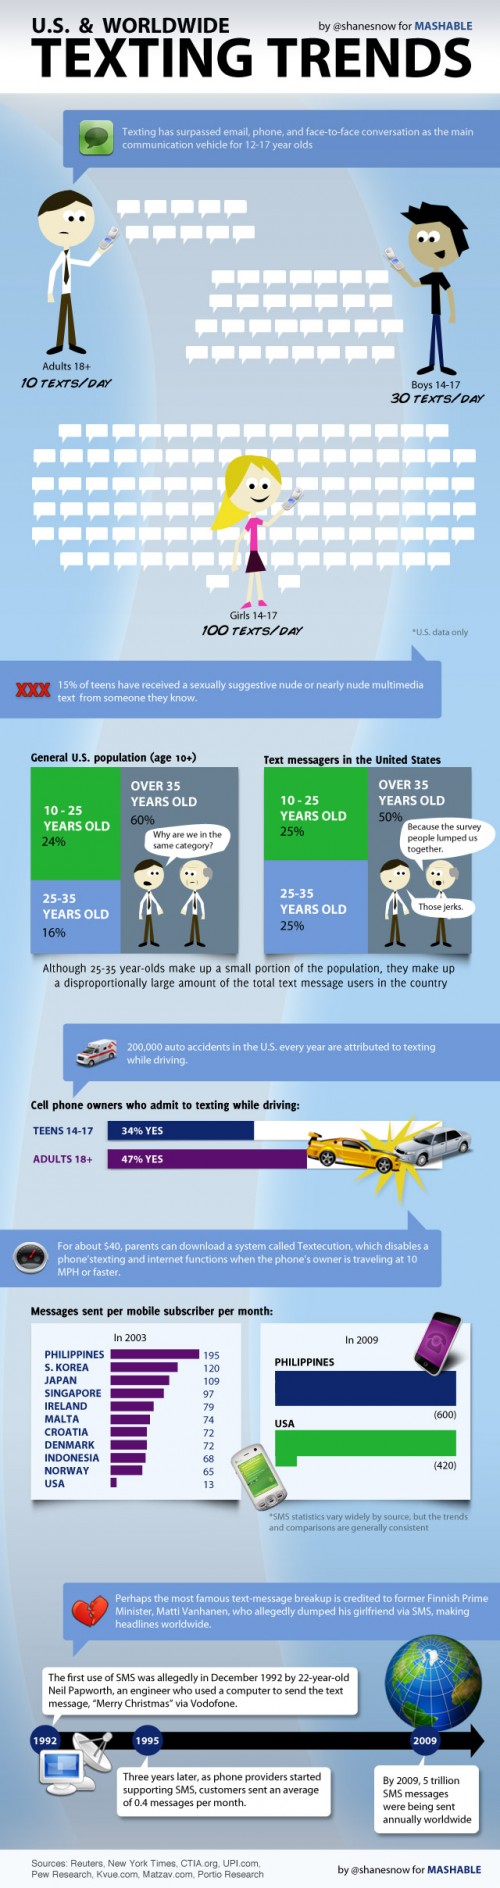 Texting Statistics and Trends Infographic